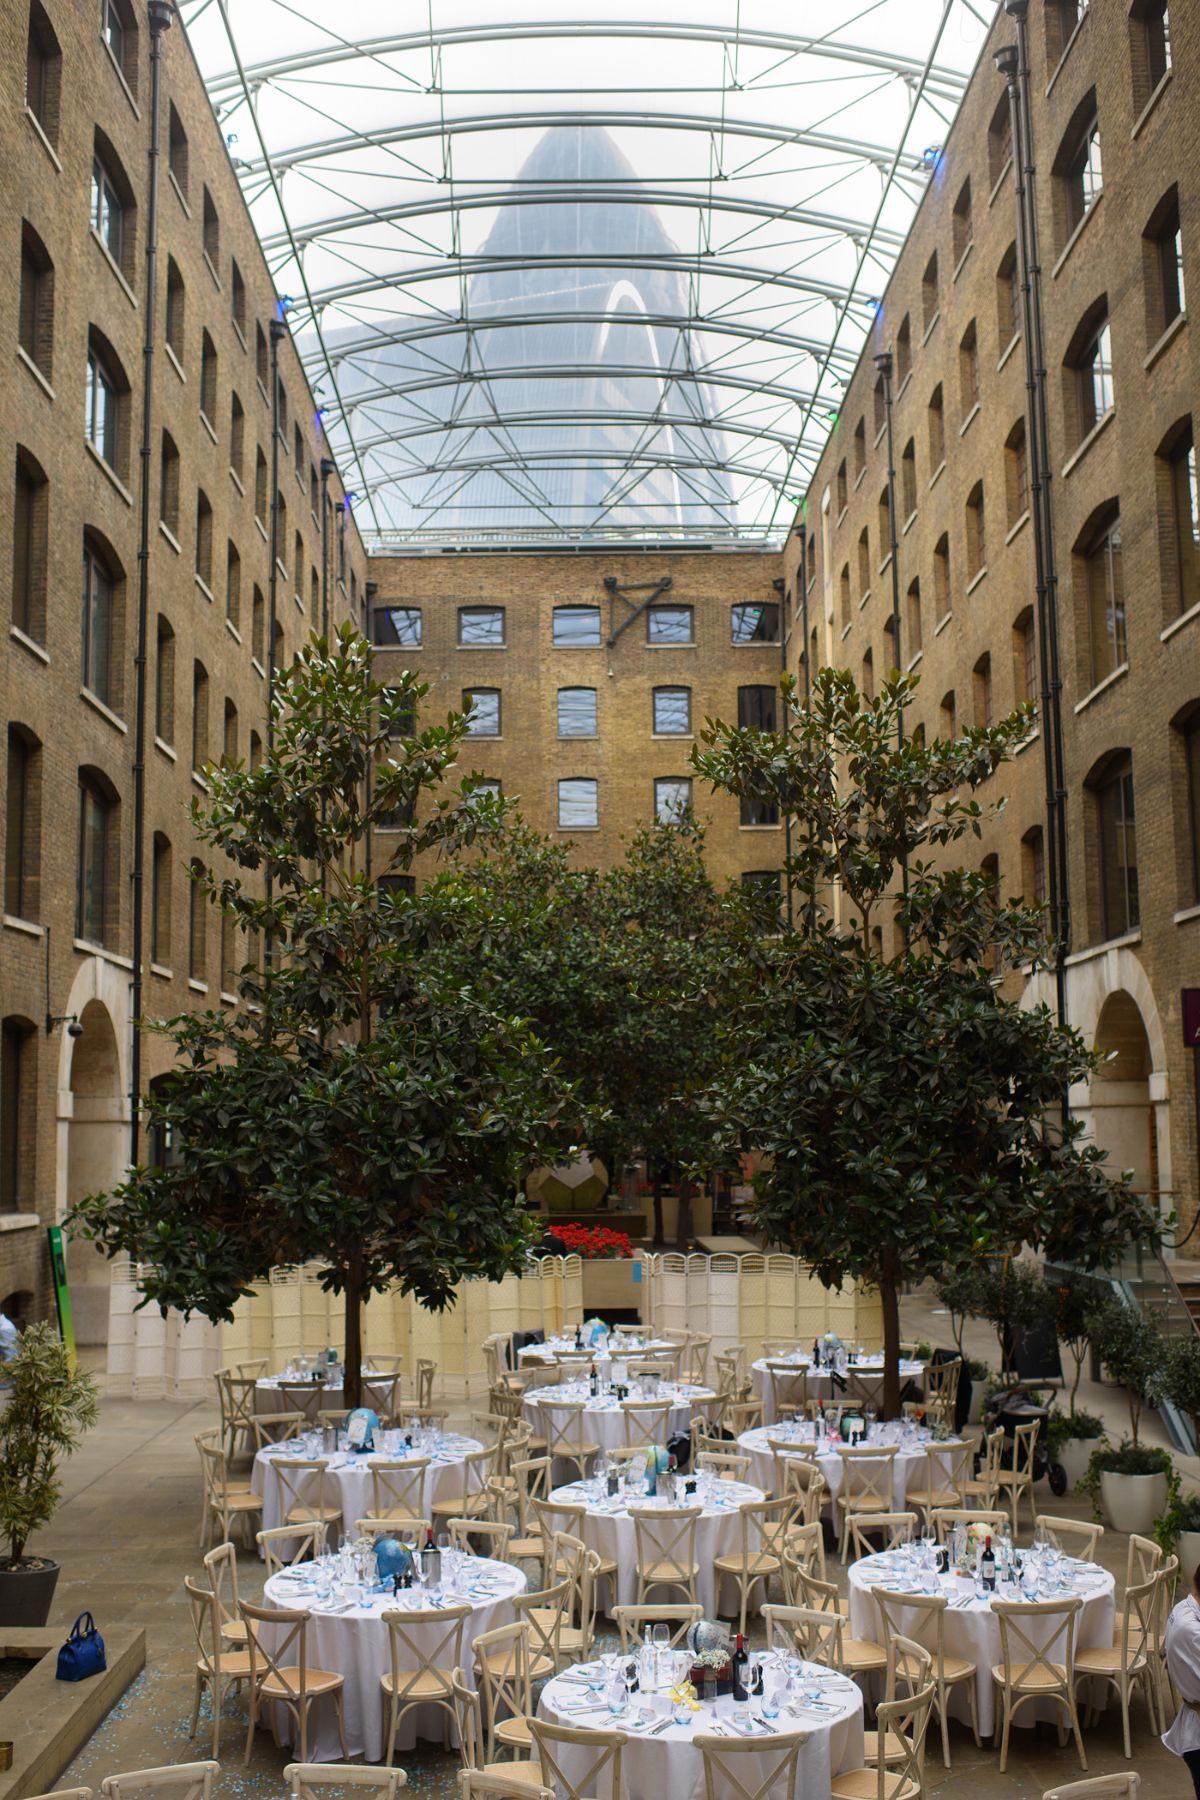 A wide shot of Devonshire Terrace, showing it's high glass ceiling above a courtyard containing two large trees, giving the venue an indoor/outdoor feel. Through the glass ceiling you can see the shape of the Gherkin, an iconic London landmark.